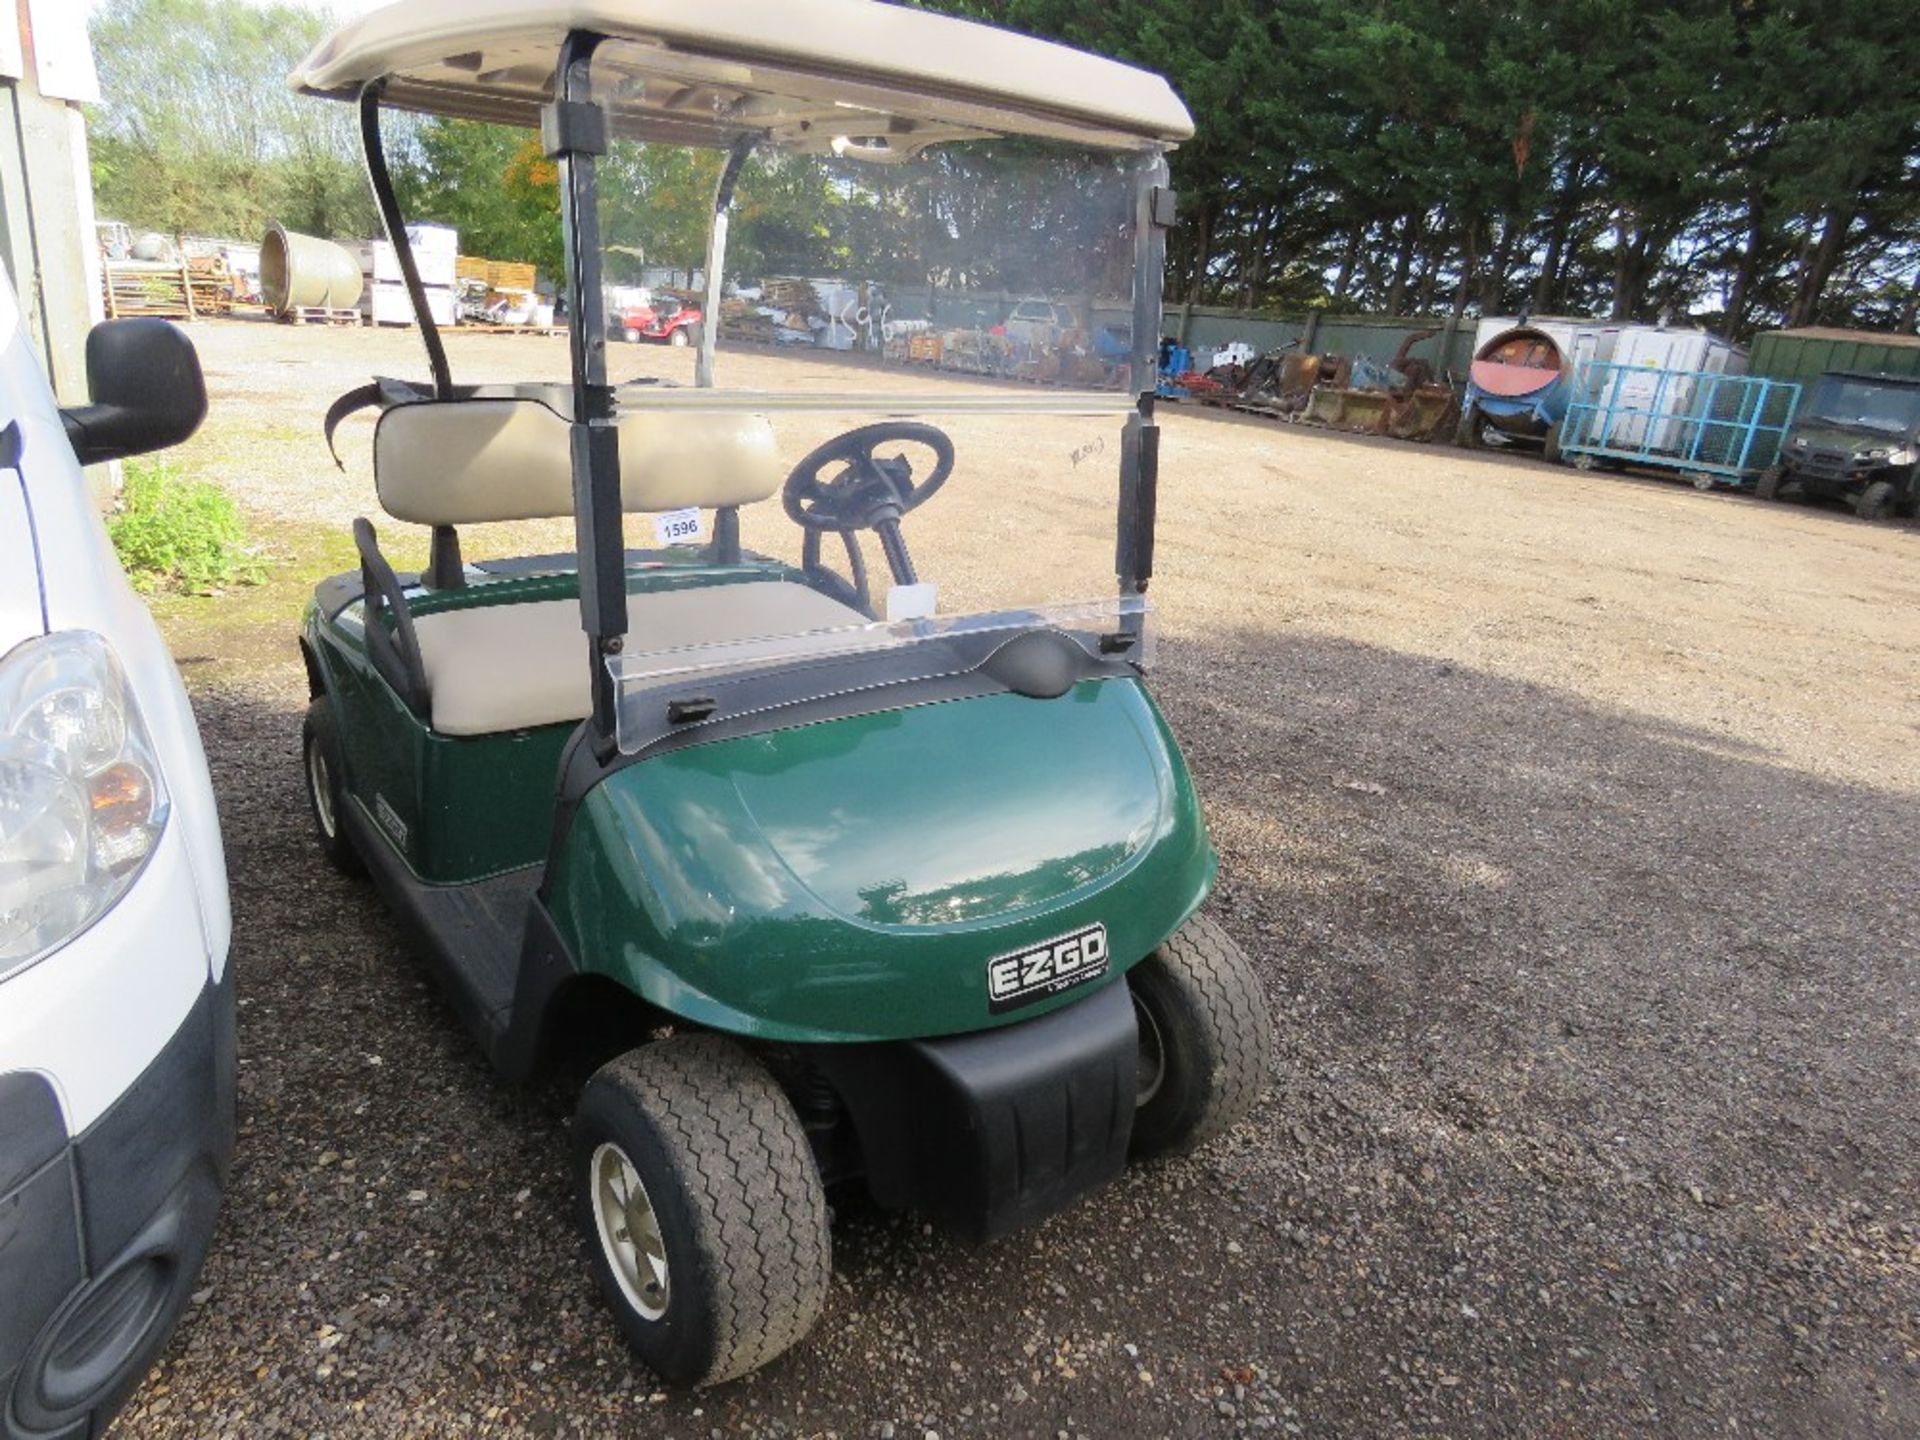 EZGO BATTERY POWERED GOLF BUGGY, YEAR 2013. WHEN TESTED WAS SEEN TO DRIVE, STEER AND BRAKE. WITH KEY